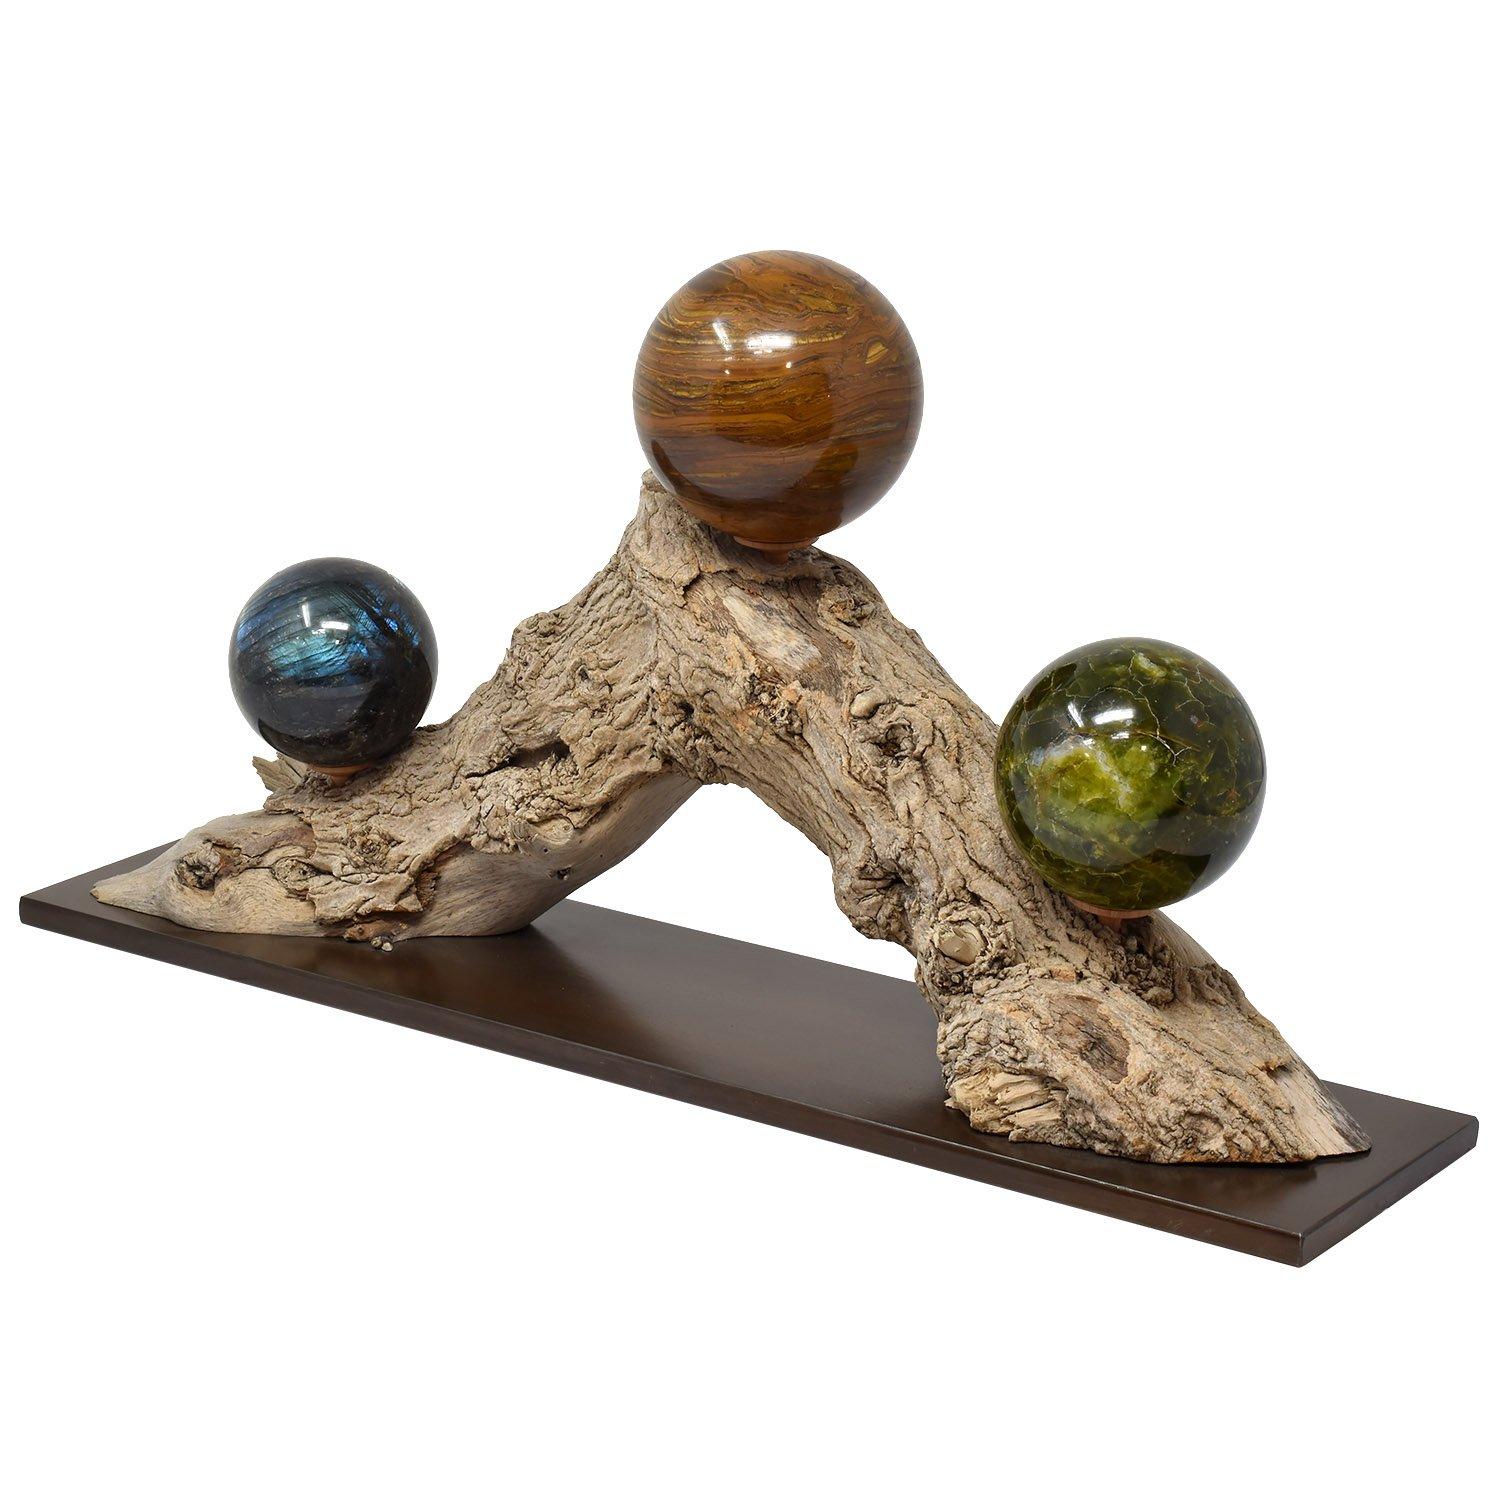 Other Three Mineral Spheres Mounted on an Organic Wood Branch